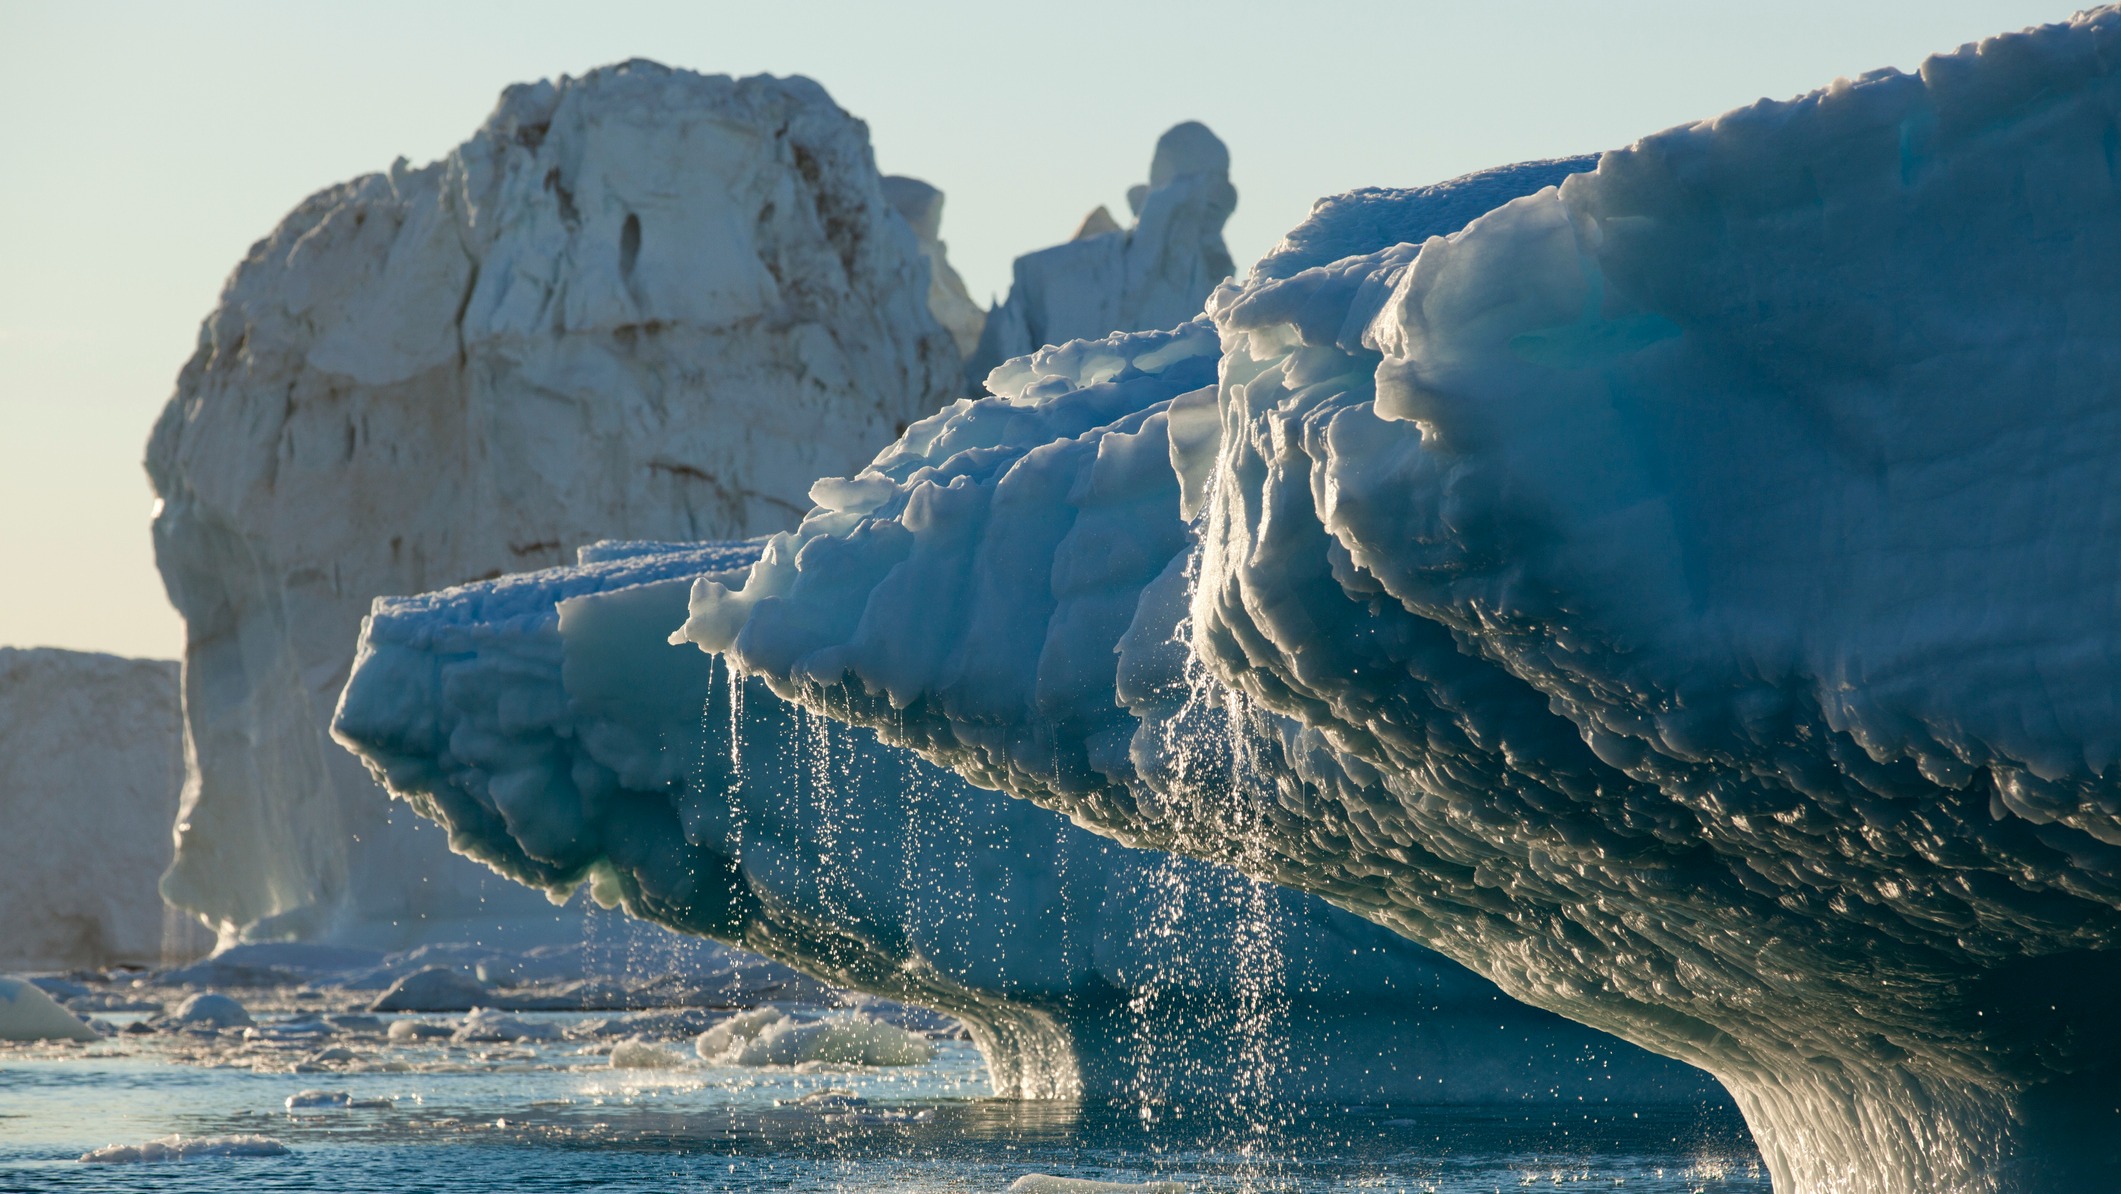 Greenland's Melting: Heat Waves Are Changing the Landscape Before